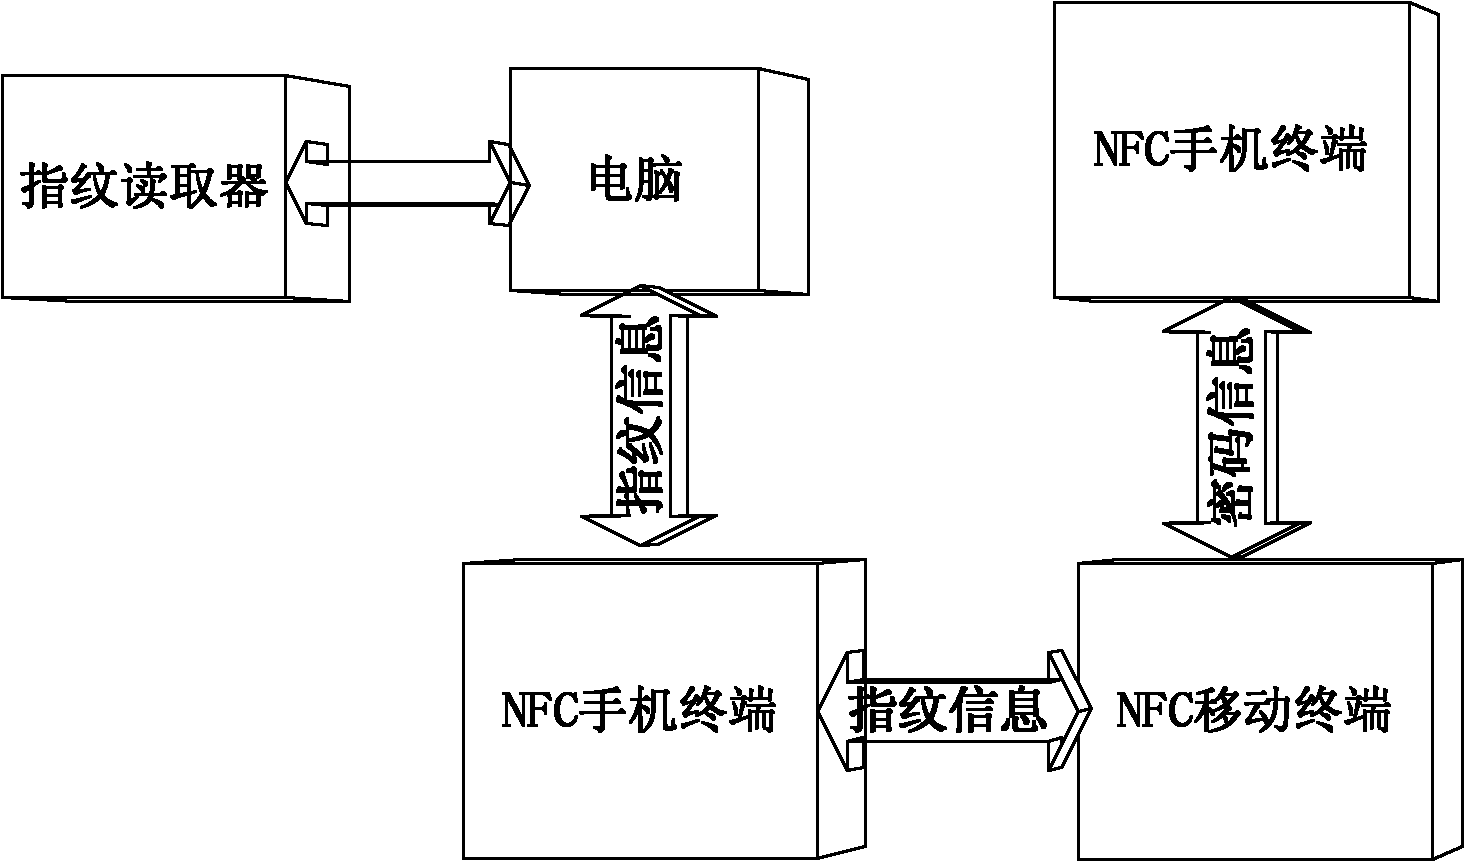 Door lock control system based on NFC and method thereof